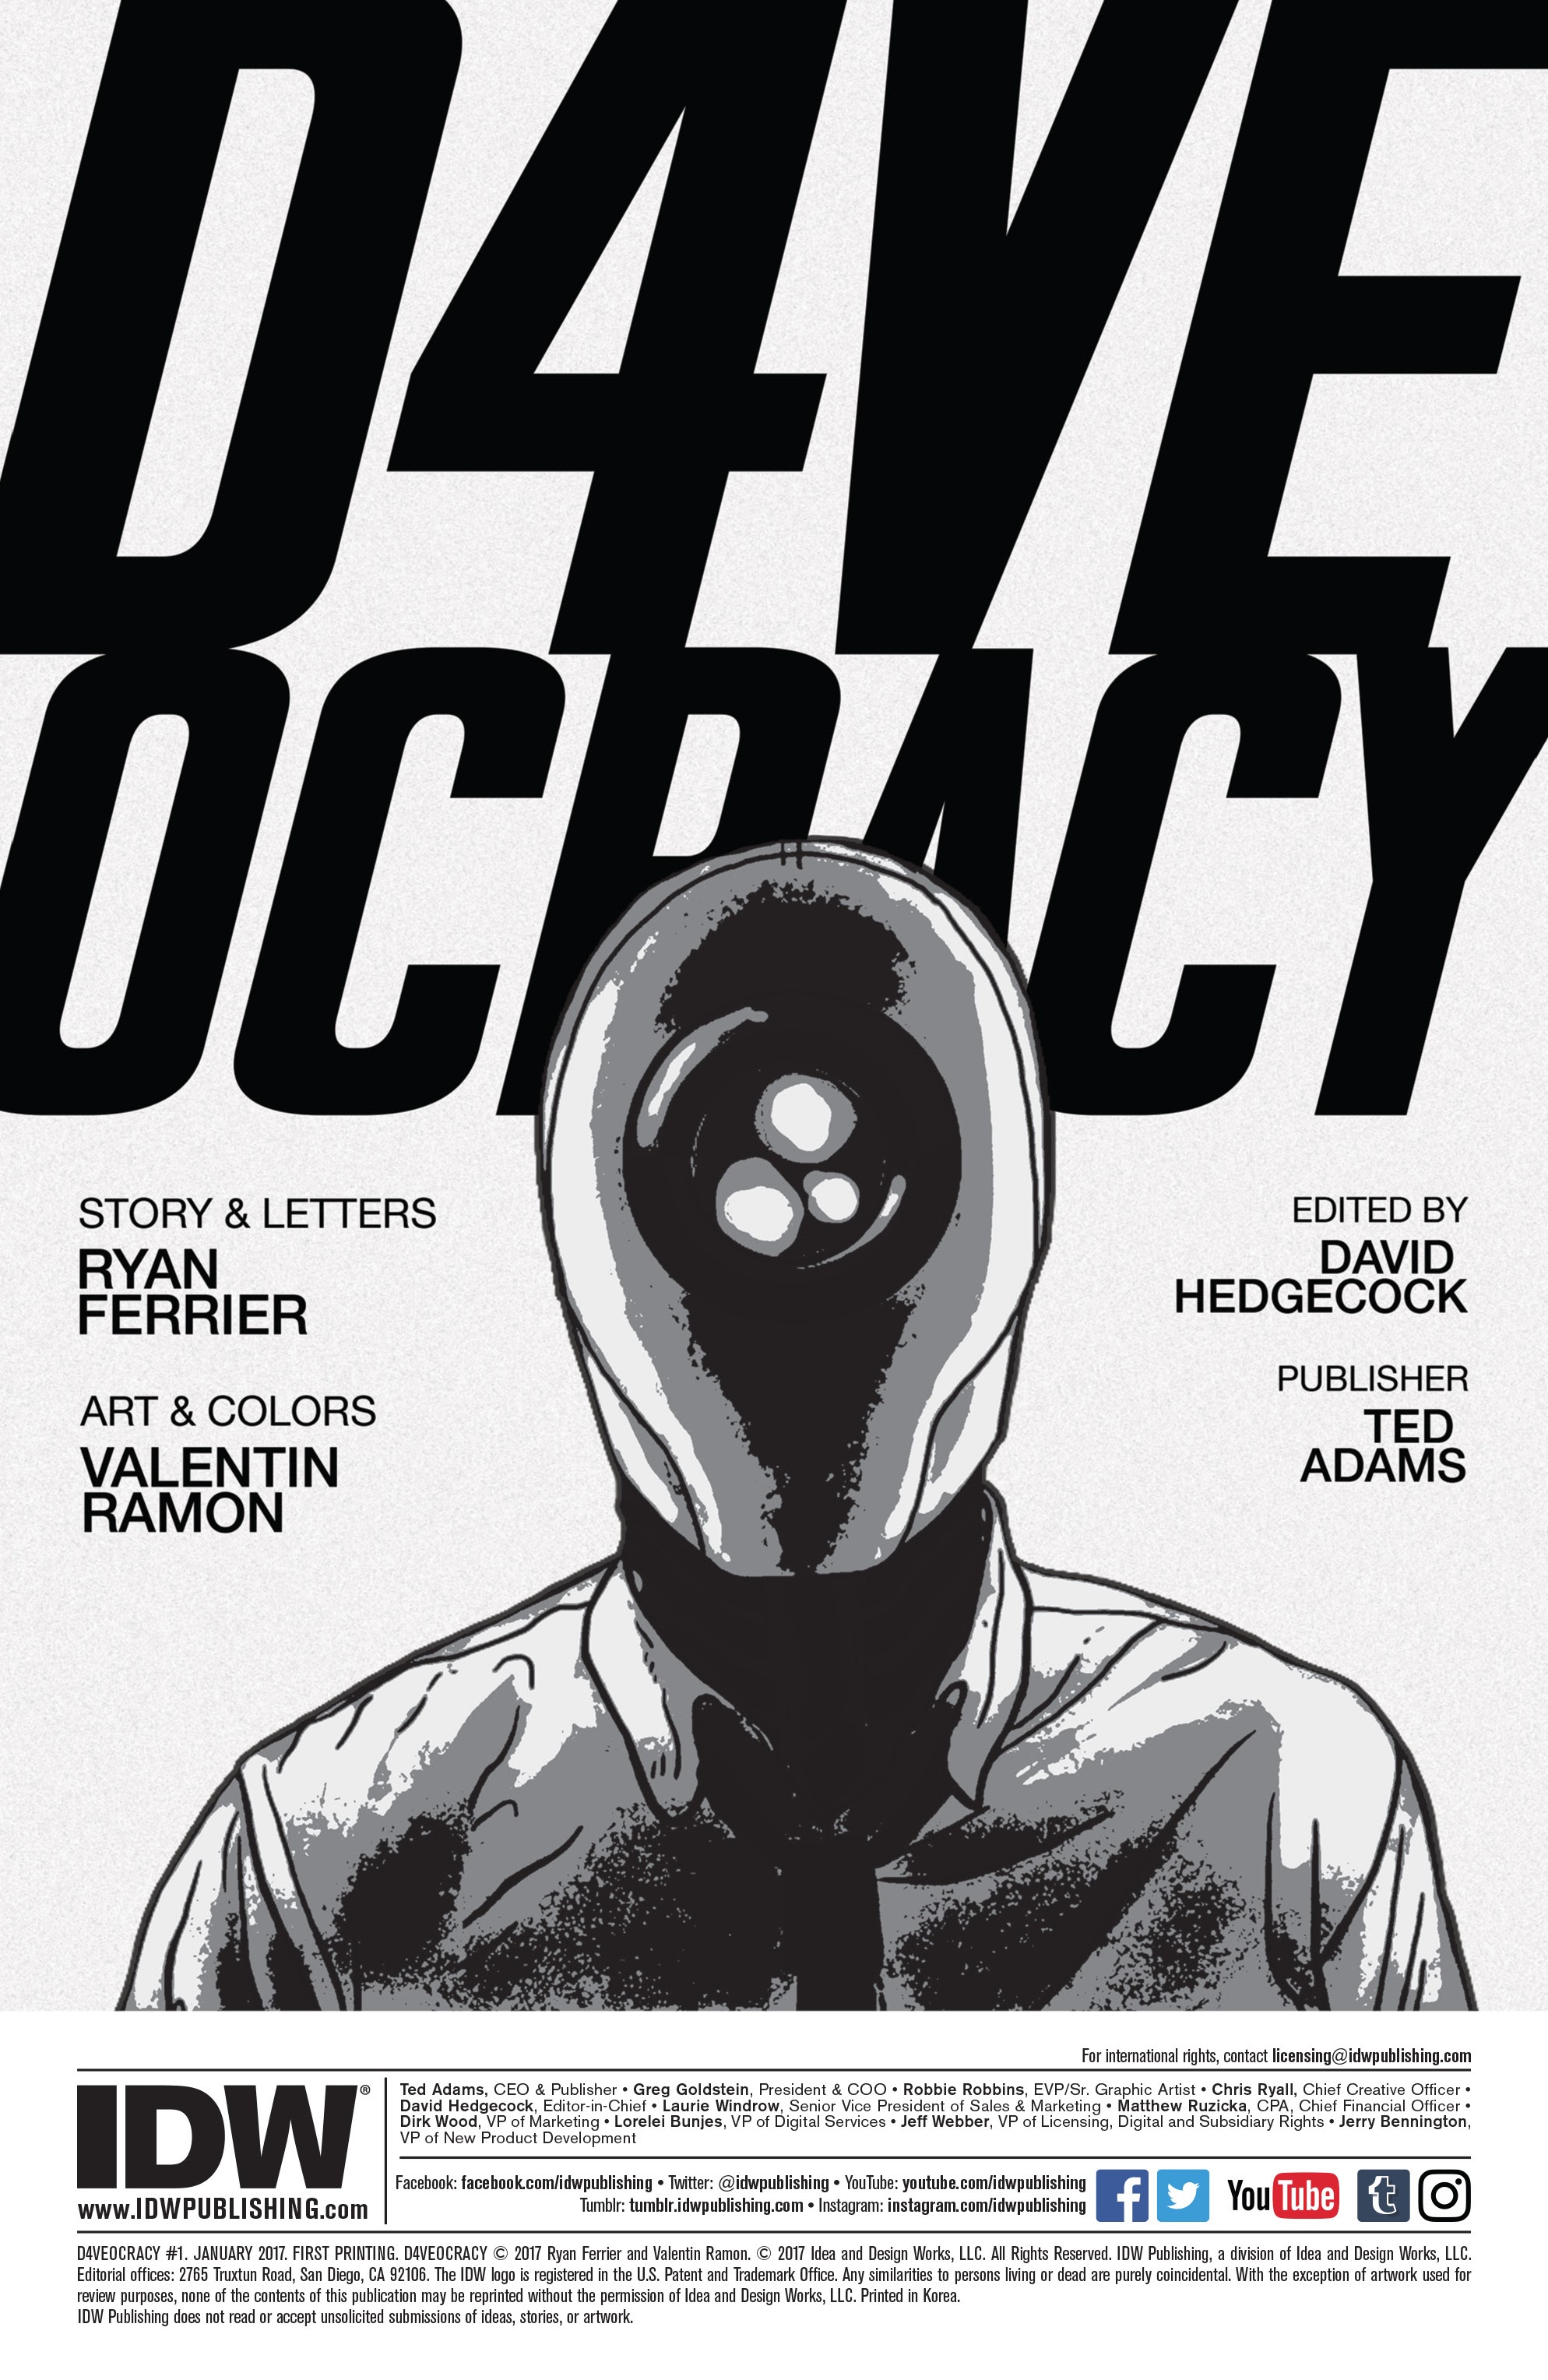 Read online D4VEocracy comic -  Issue #1 - 2